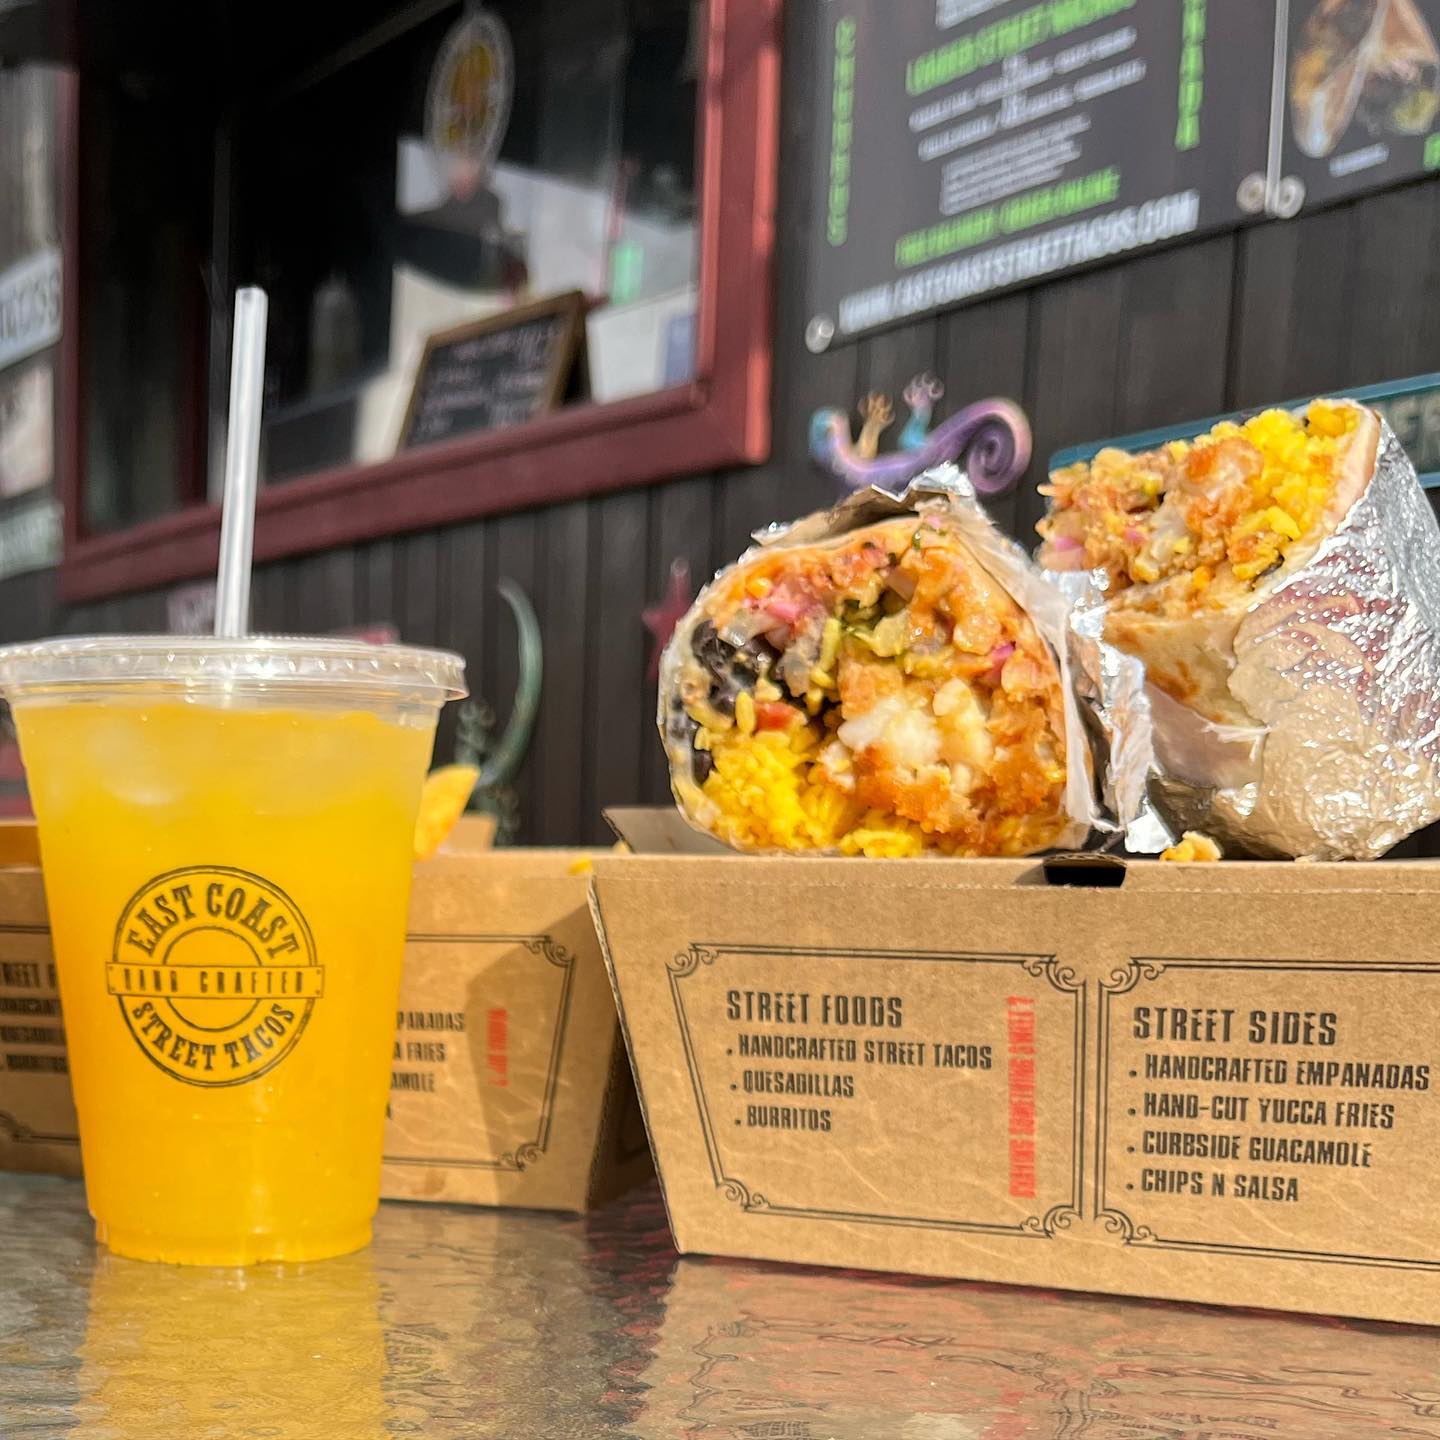 New York's East Coast Street Tacos Expanding to Georgia With First Franchise